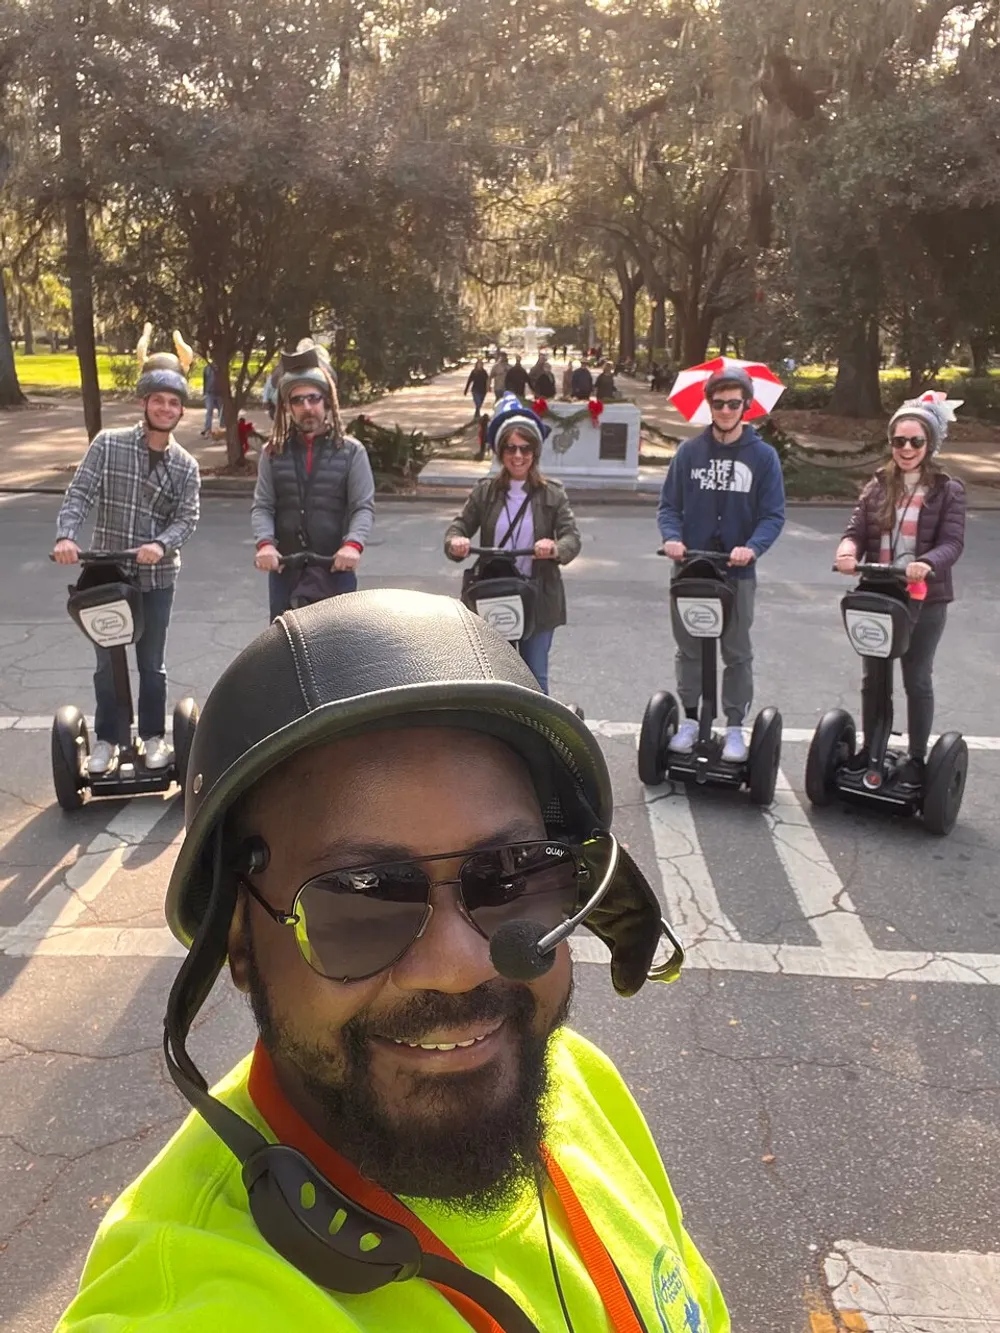 A smiling person in the foreground takes a selfie with a group of people behind them riding Segways in a park-like setting